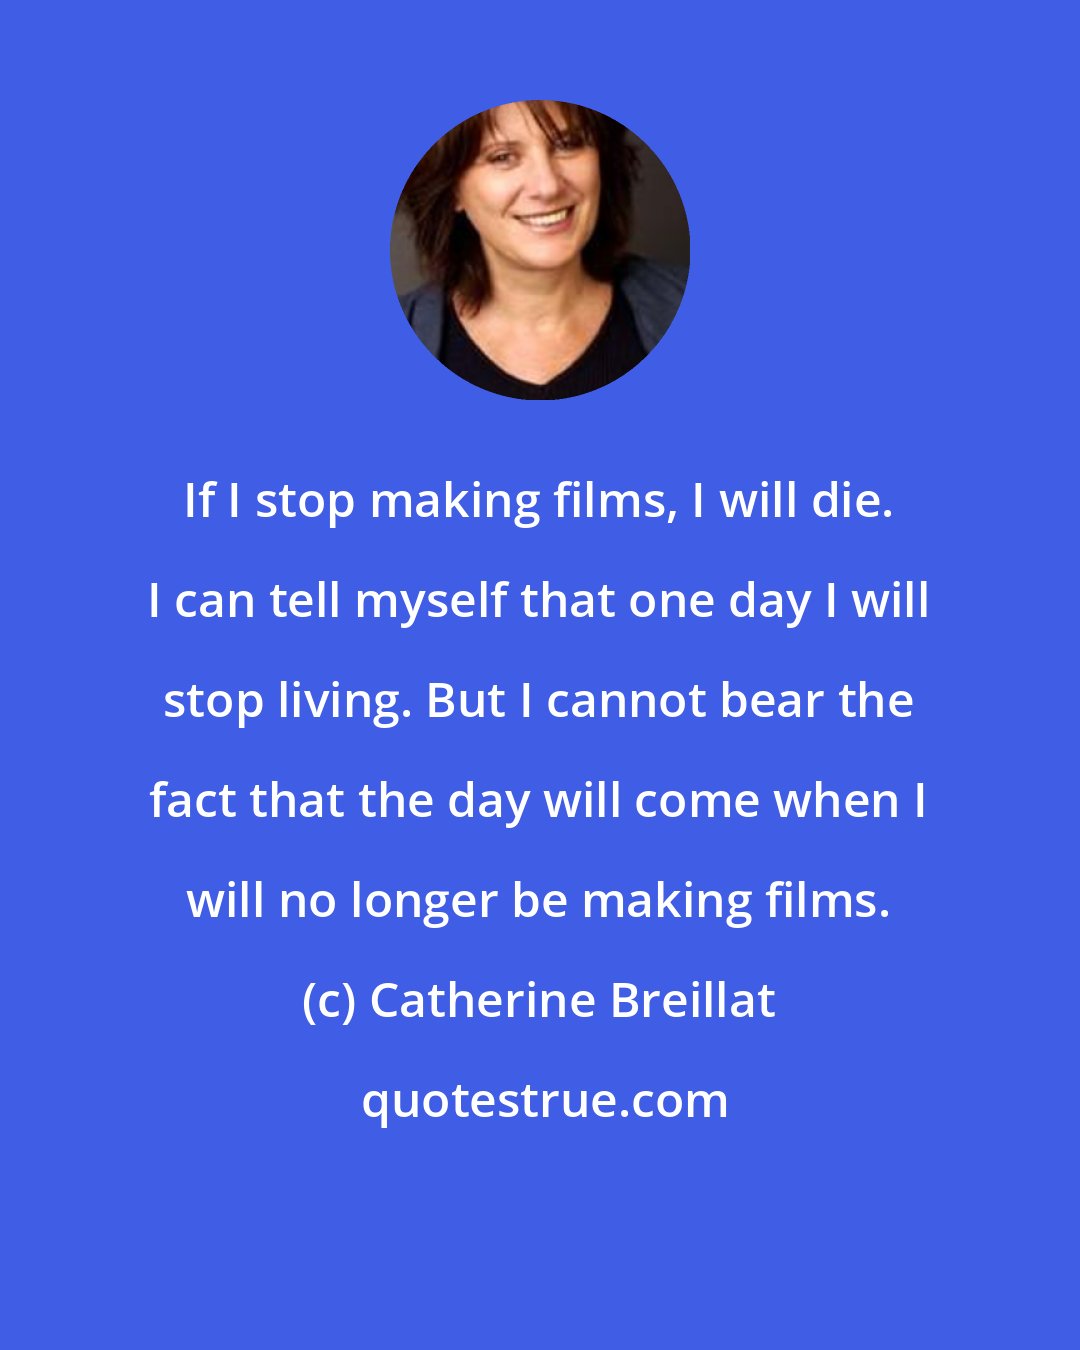 Catherine Breillat: If I stop making films, I will die. I can tell myself that one day I will stop living. But I cannot bear the fact that the day will come when I will no longer be making films.